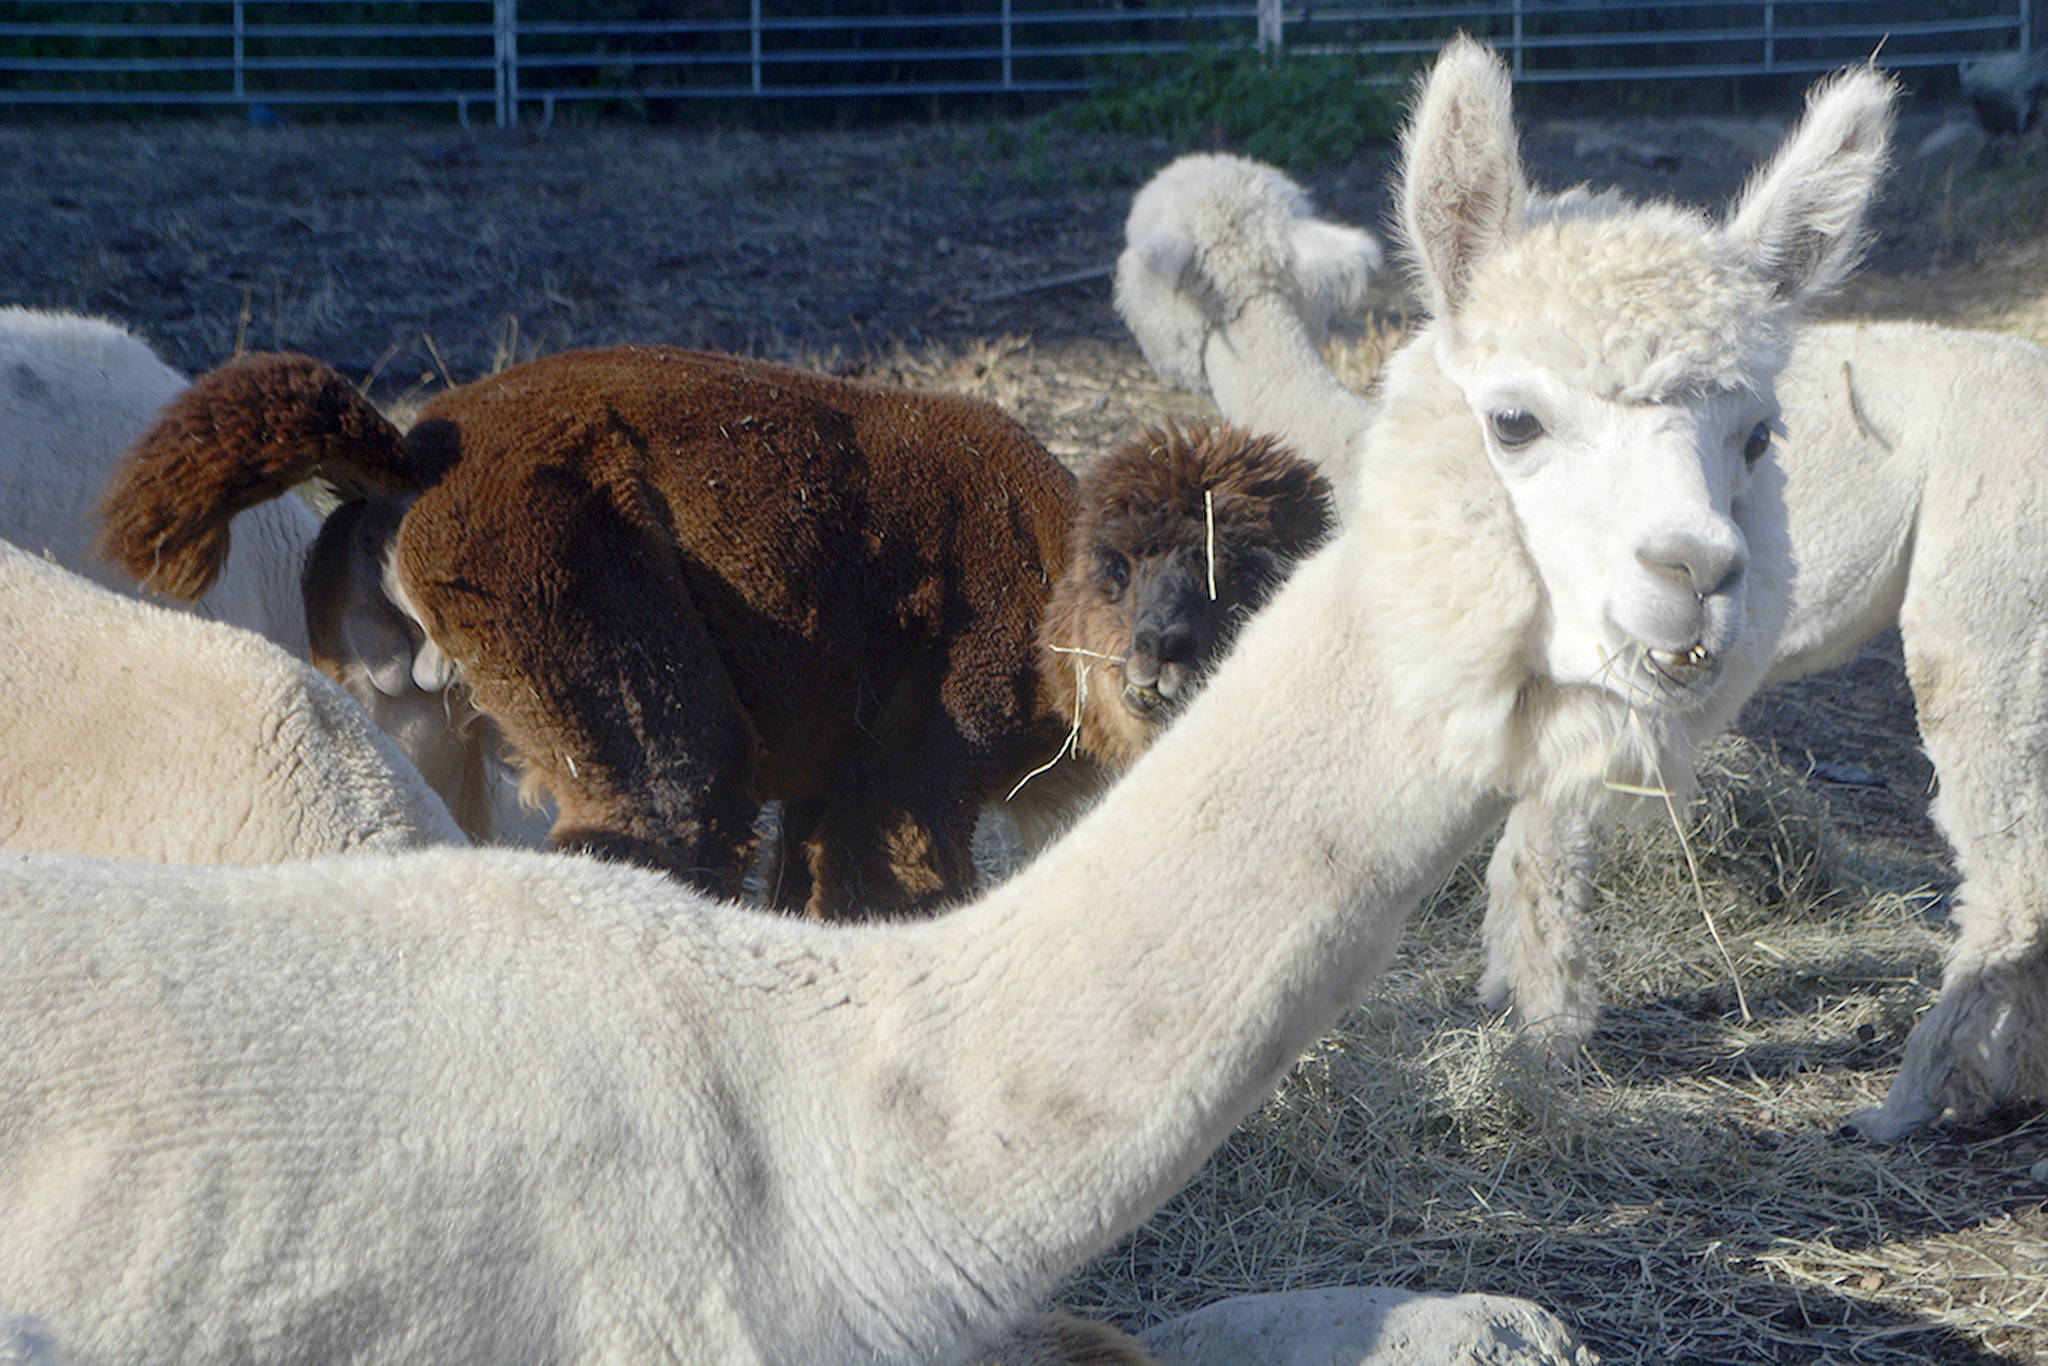 Can’t buy me love, but come close with alpaca fleece clothes (slide show)